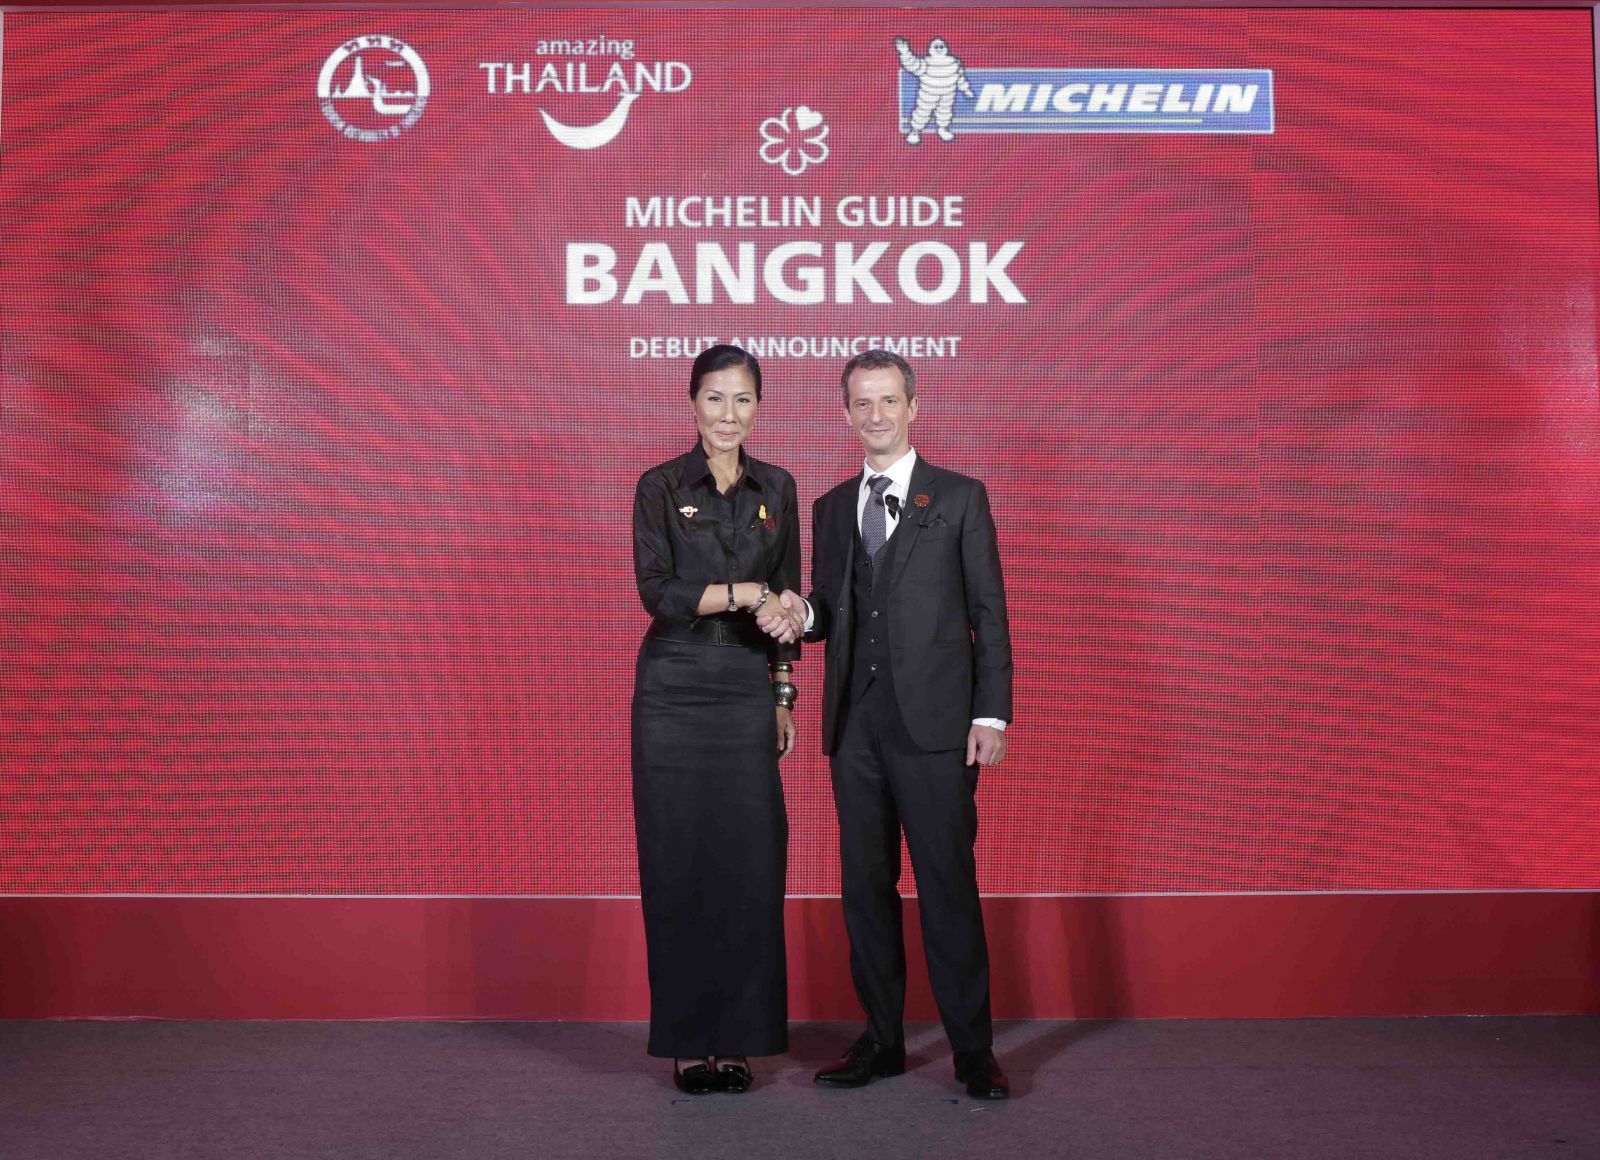 Michelin In Partnership With TAT Will Be Launched The First Michelin Guide Bangkok This Year